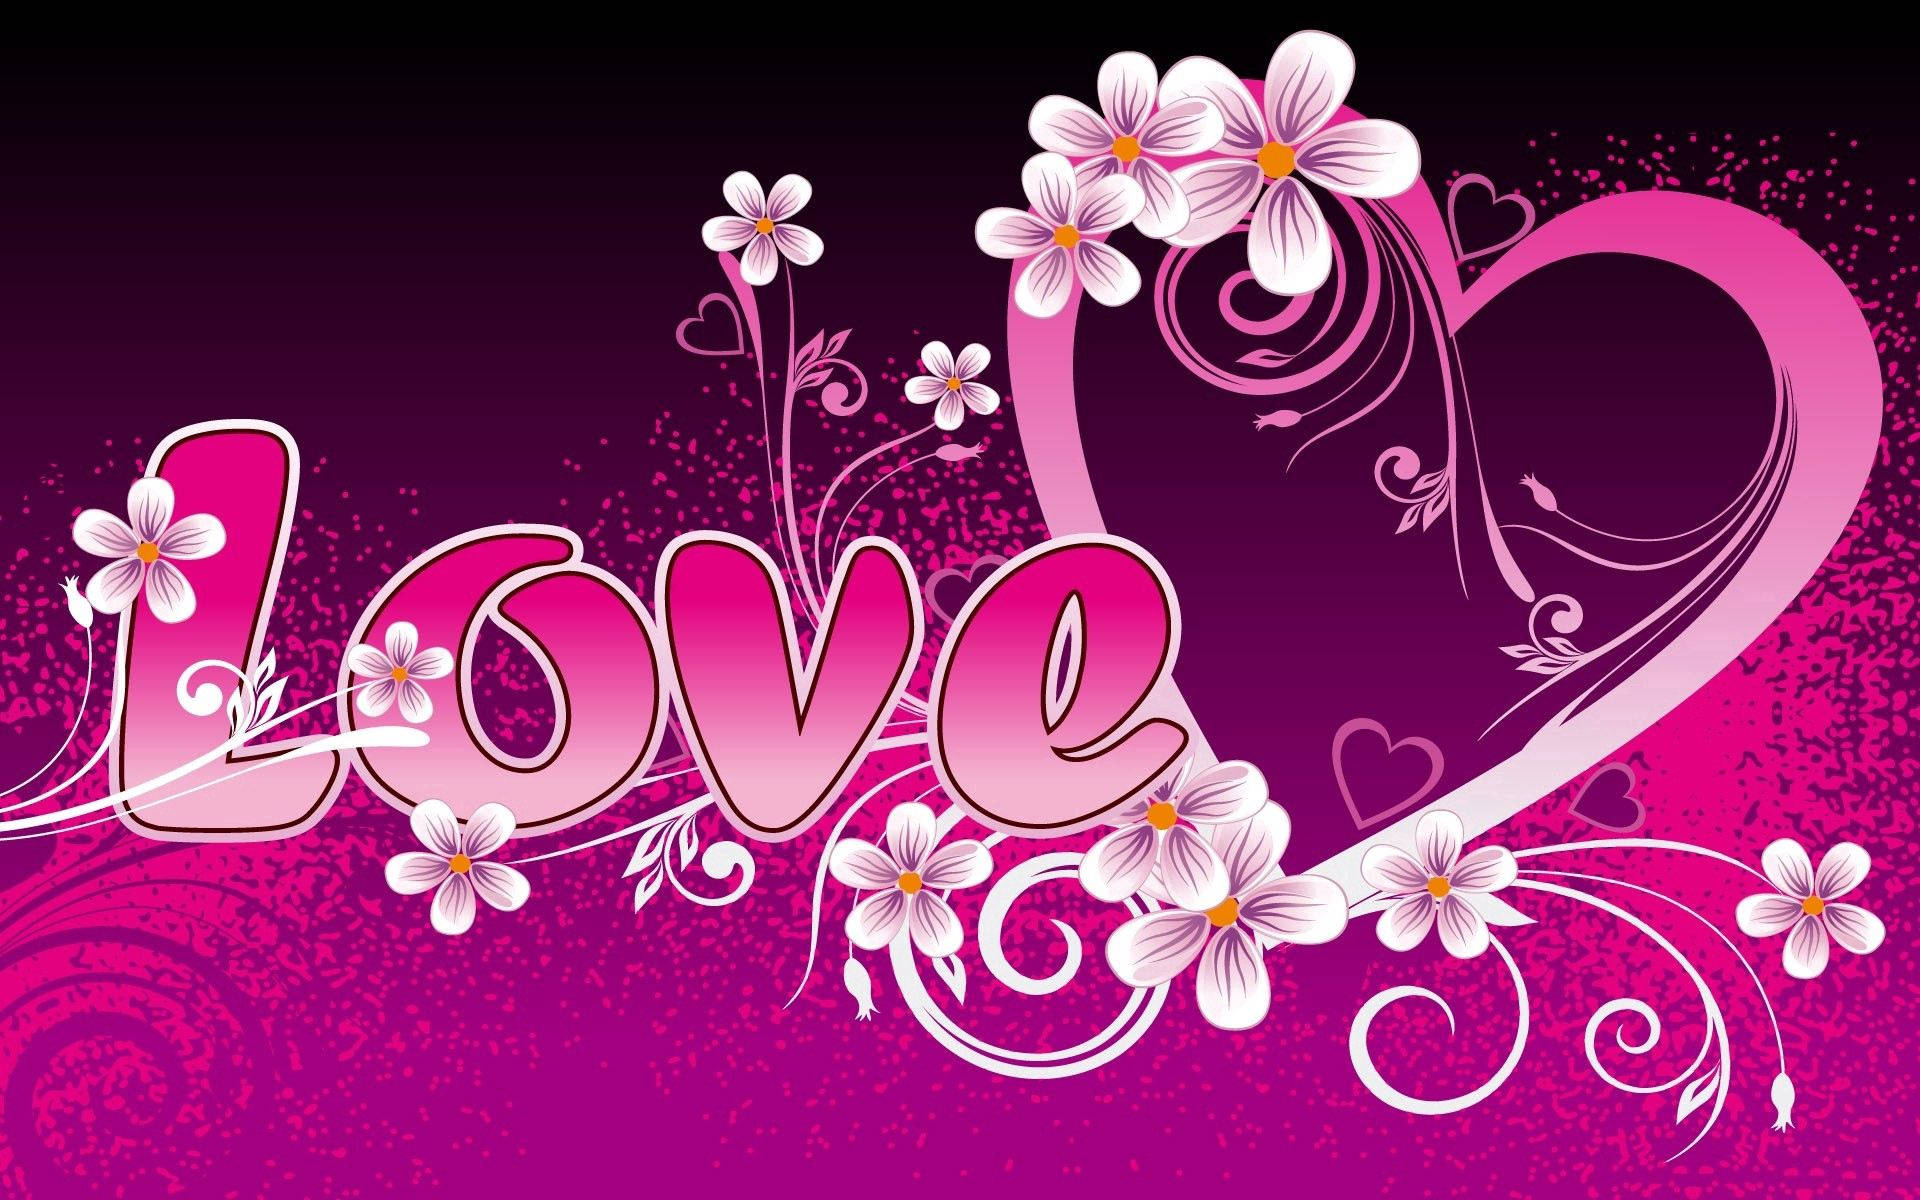 Love is in the Air Wallpaper